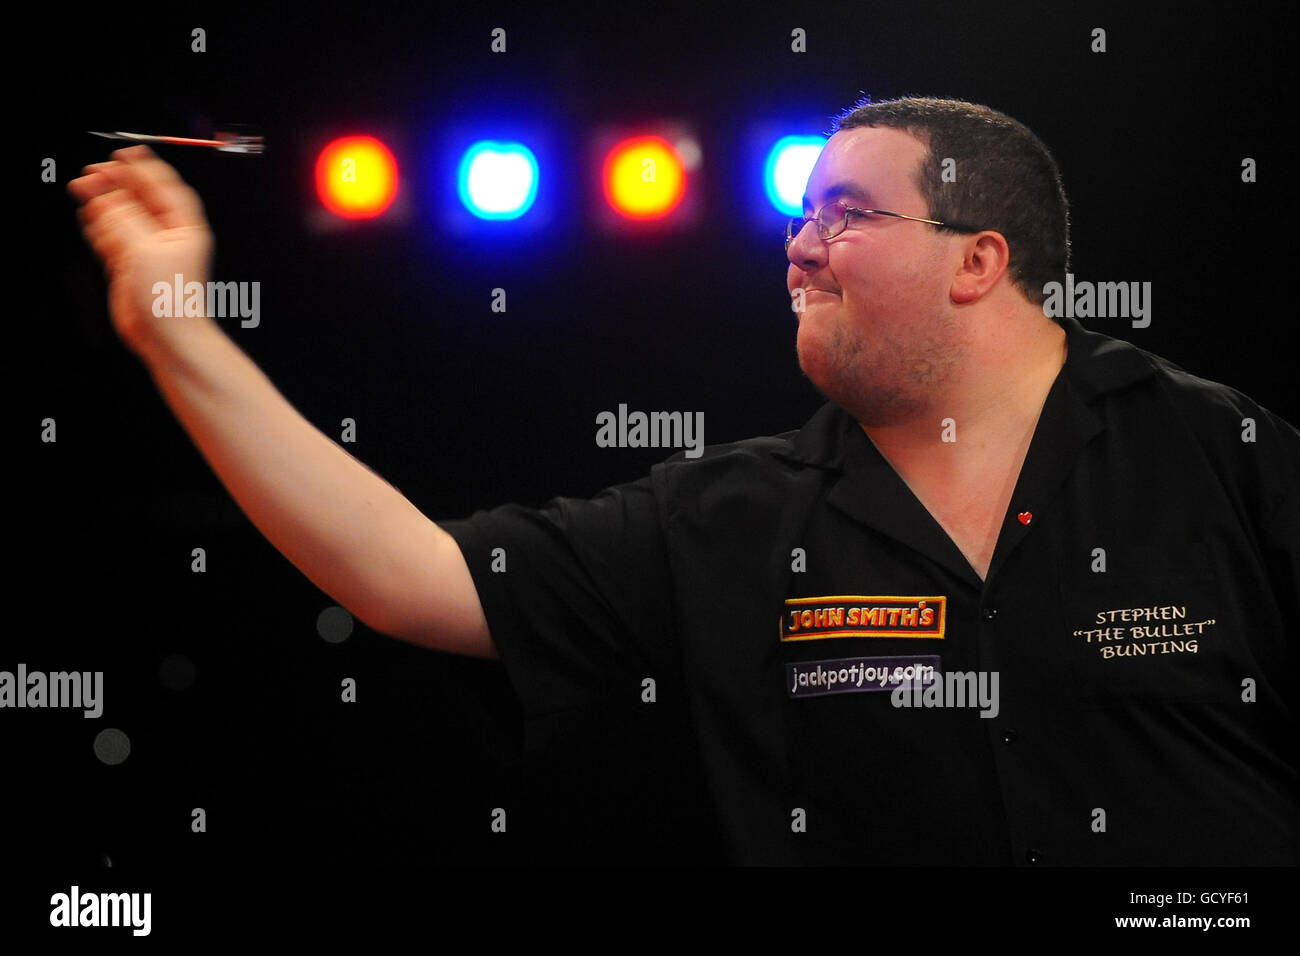 England's Stephen Bunting in action against England's Dean Winstanley during the BDO World Professional Darts Championship at the Lakeside Complex, Surrey. Stock Photo